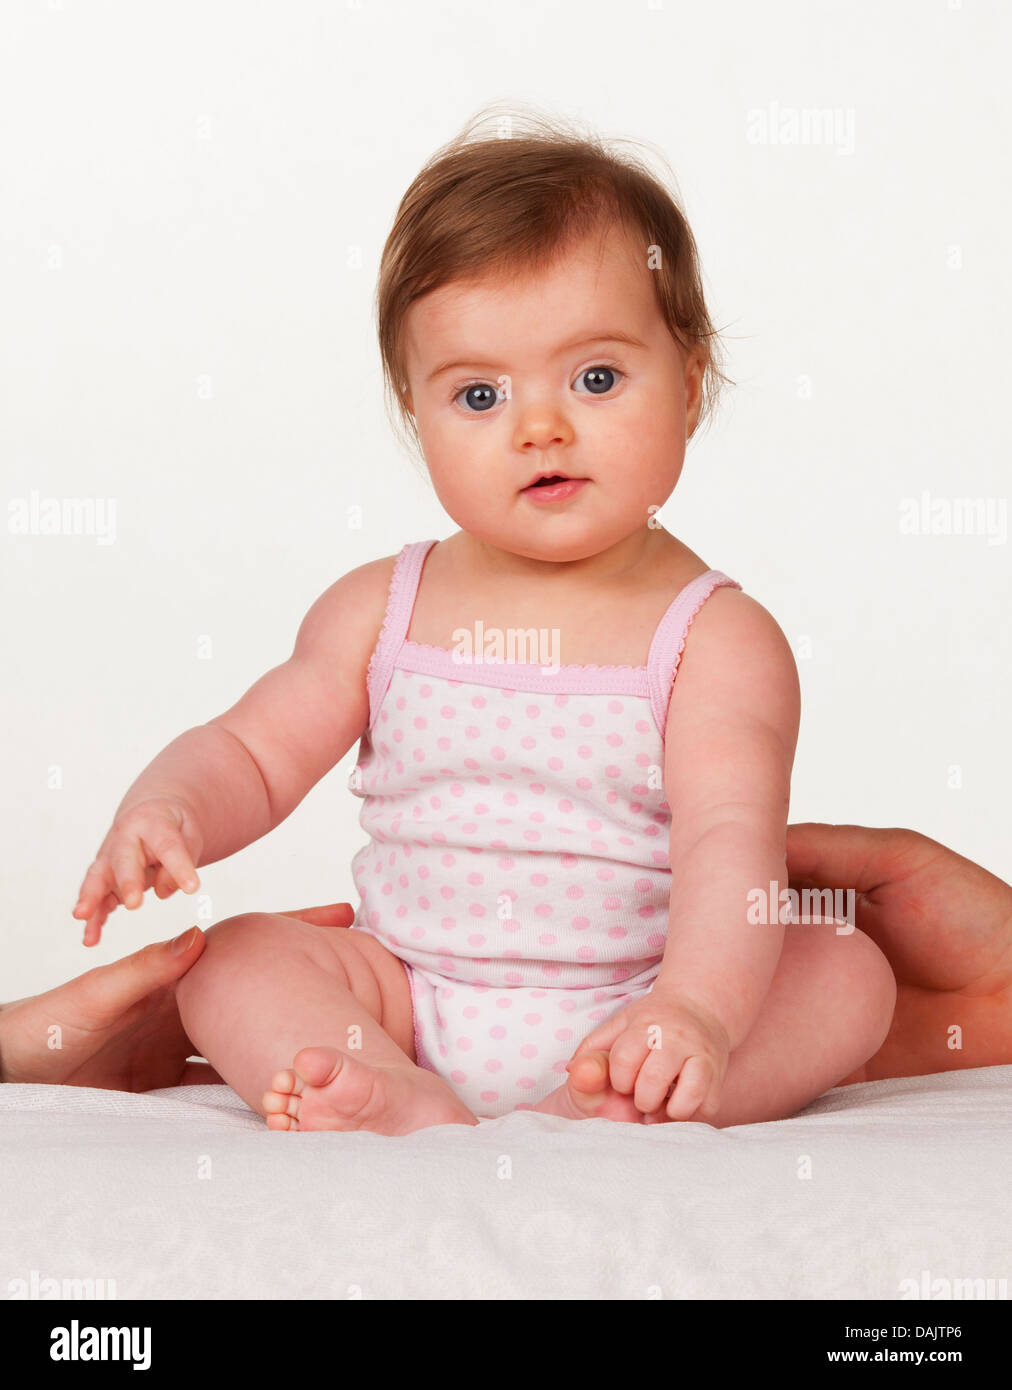 Portrait of baby girl sitting on bed, Close up Banque D'Images